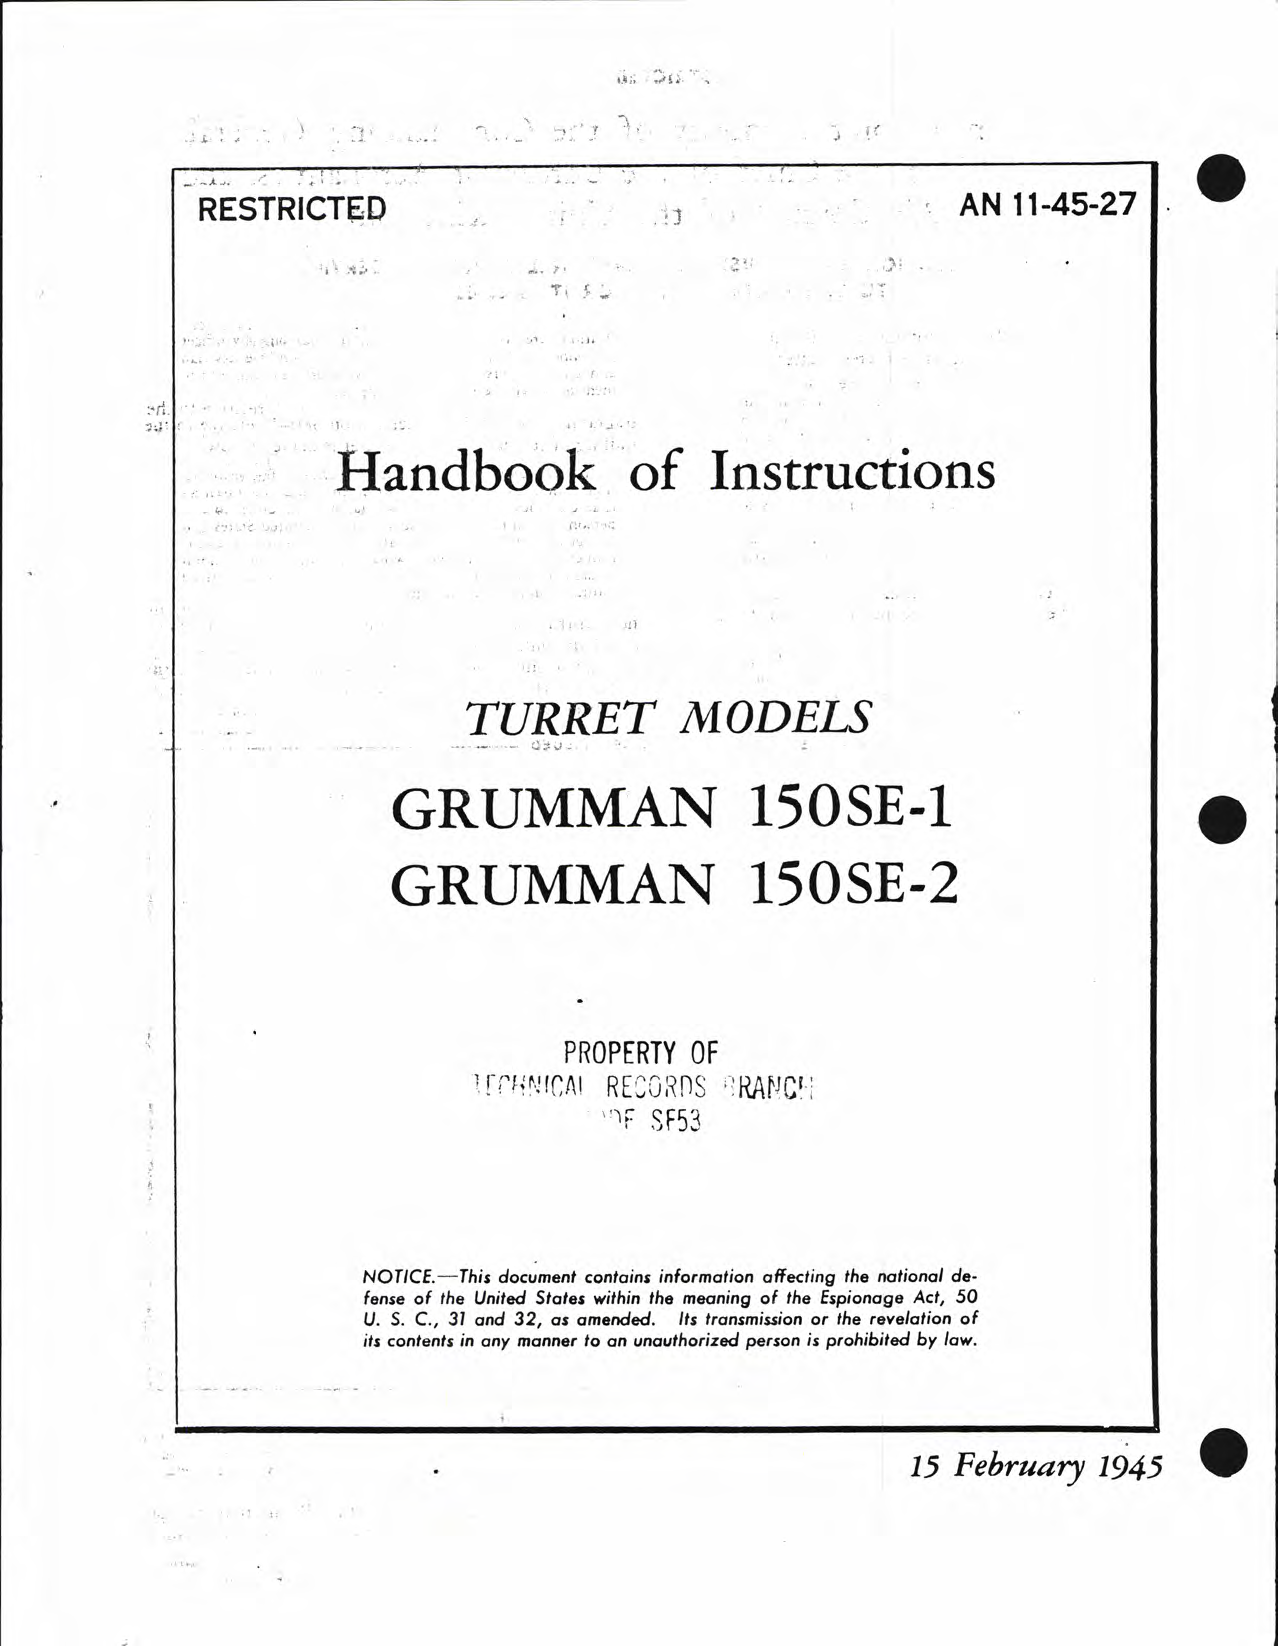 Sample page 1 from AirCorps Library document: Handbook of Instructions with Parts Catalog for Turret Models Grumman 150SE-1 and 150SE-2